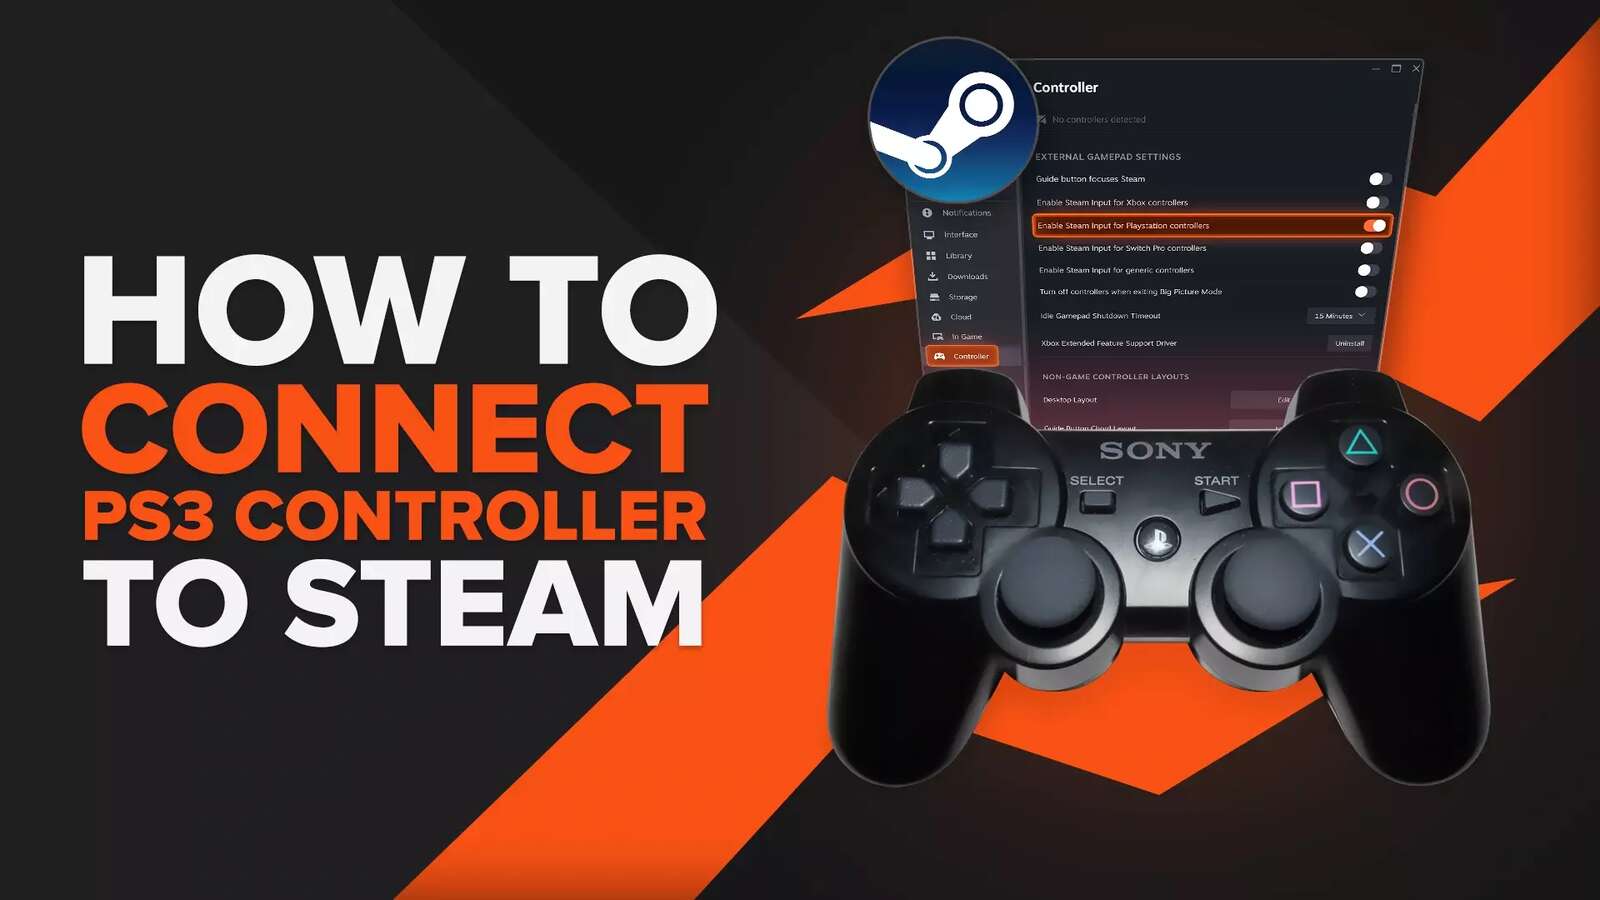 How to Connect a PS3 Controller to Steam on PC Easily